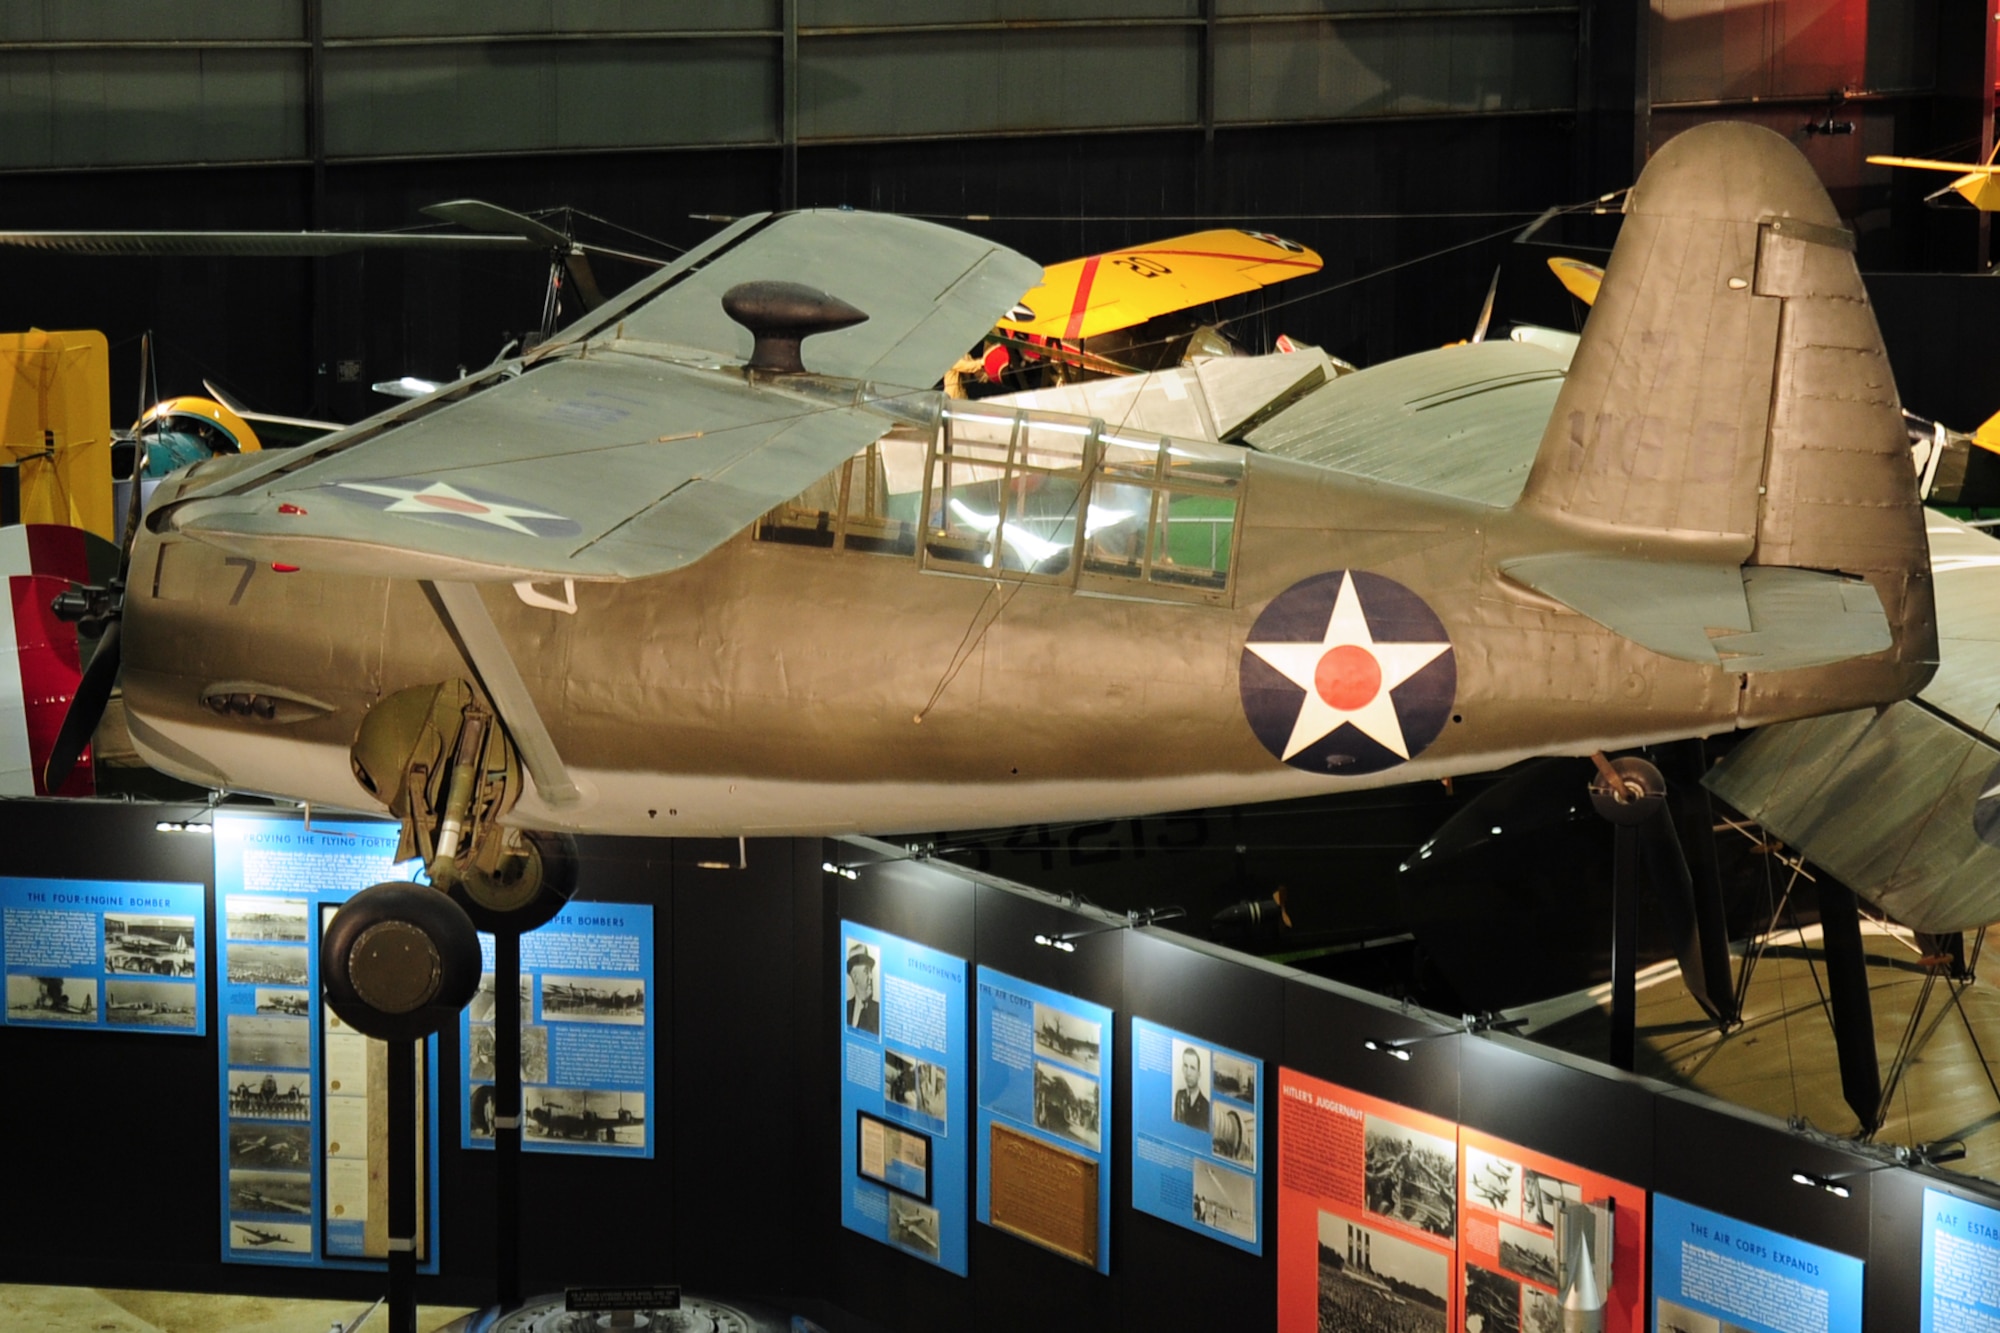 DAYTON, Ohio -- Curtiss O-52 in the Early Years Gallery at the National Museum of the United States Air Force. (U.S. Air Force photo)